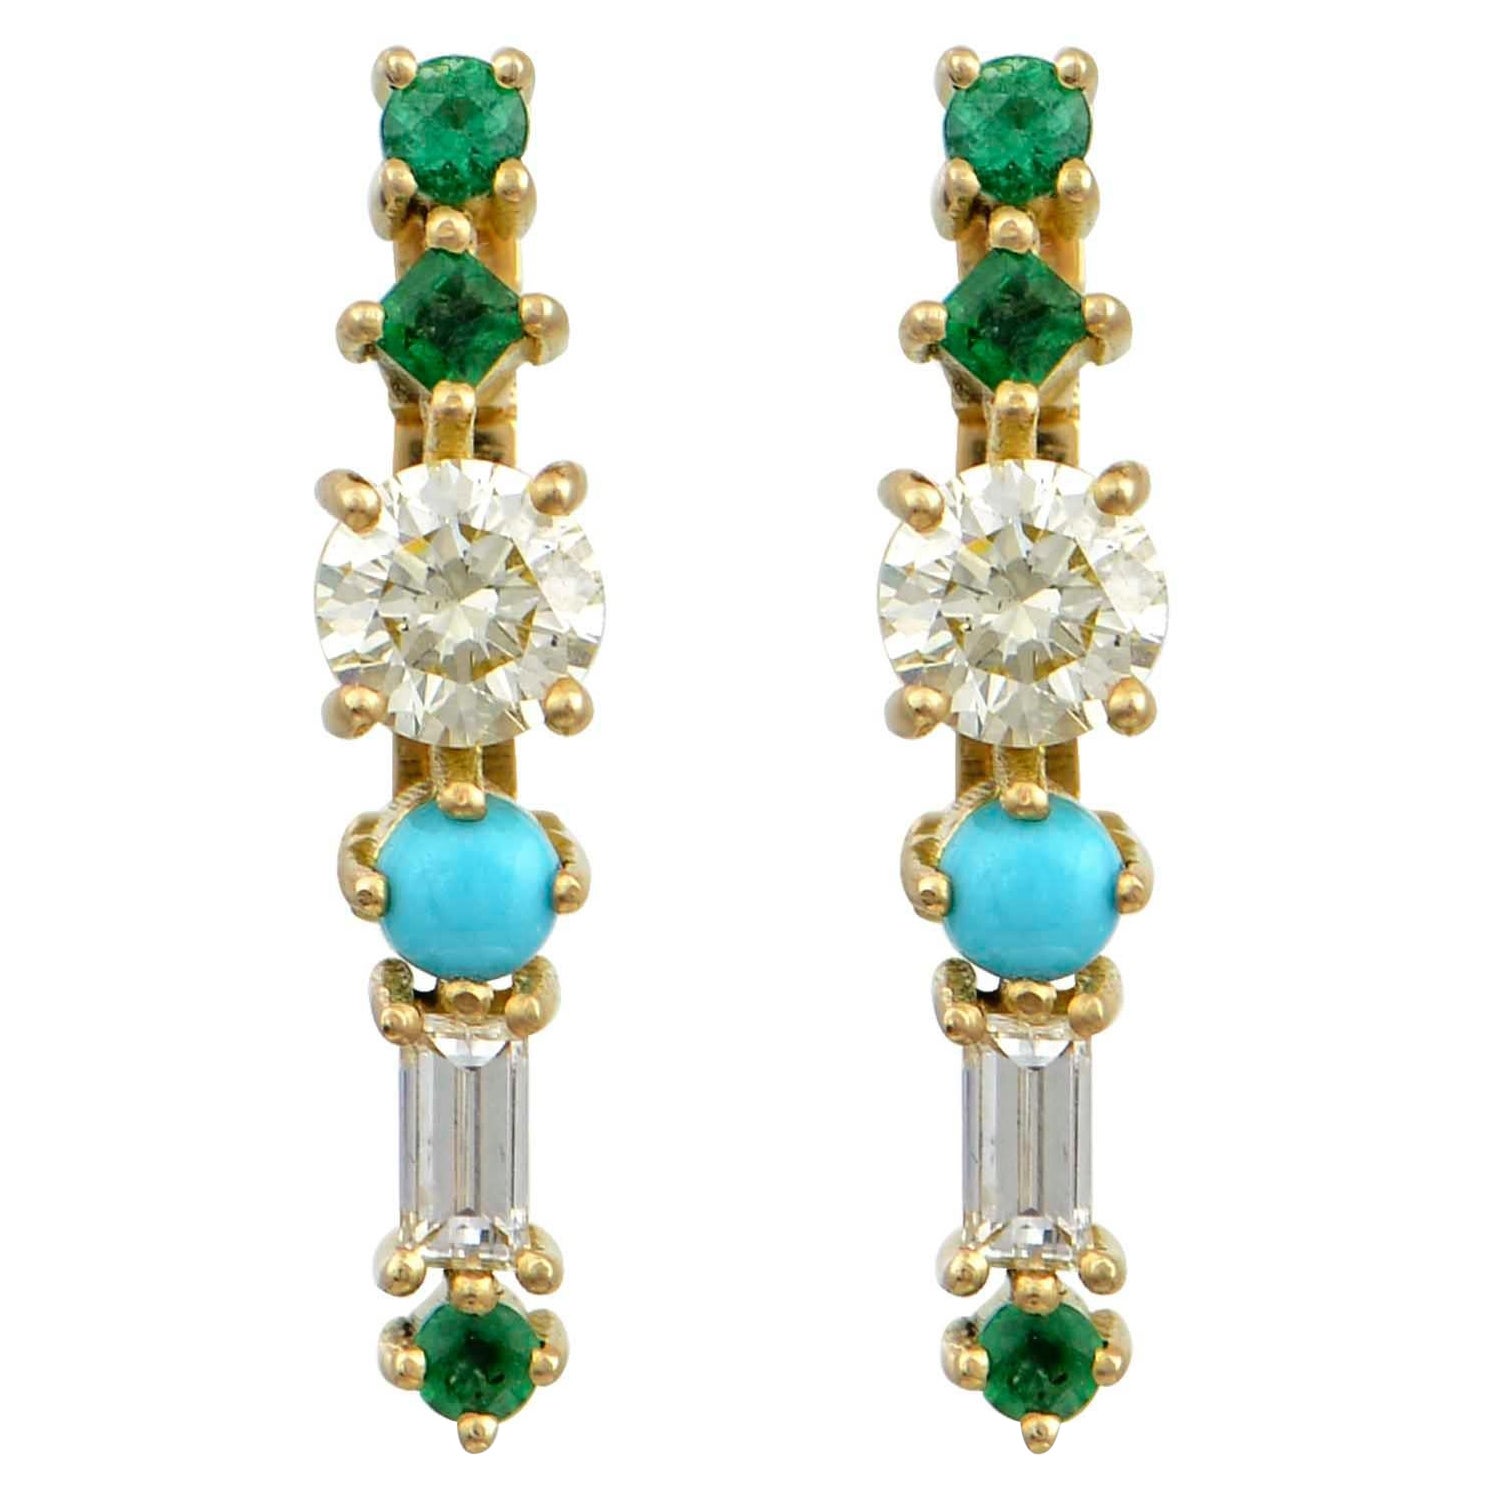 Stud Earrings in 18 Karat Yellow Gold with Diamonds, Emerlads, Turquoise For Sale